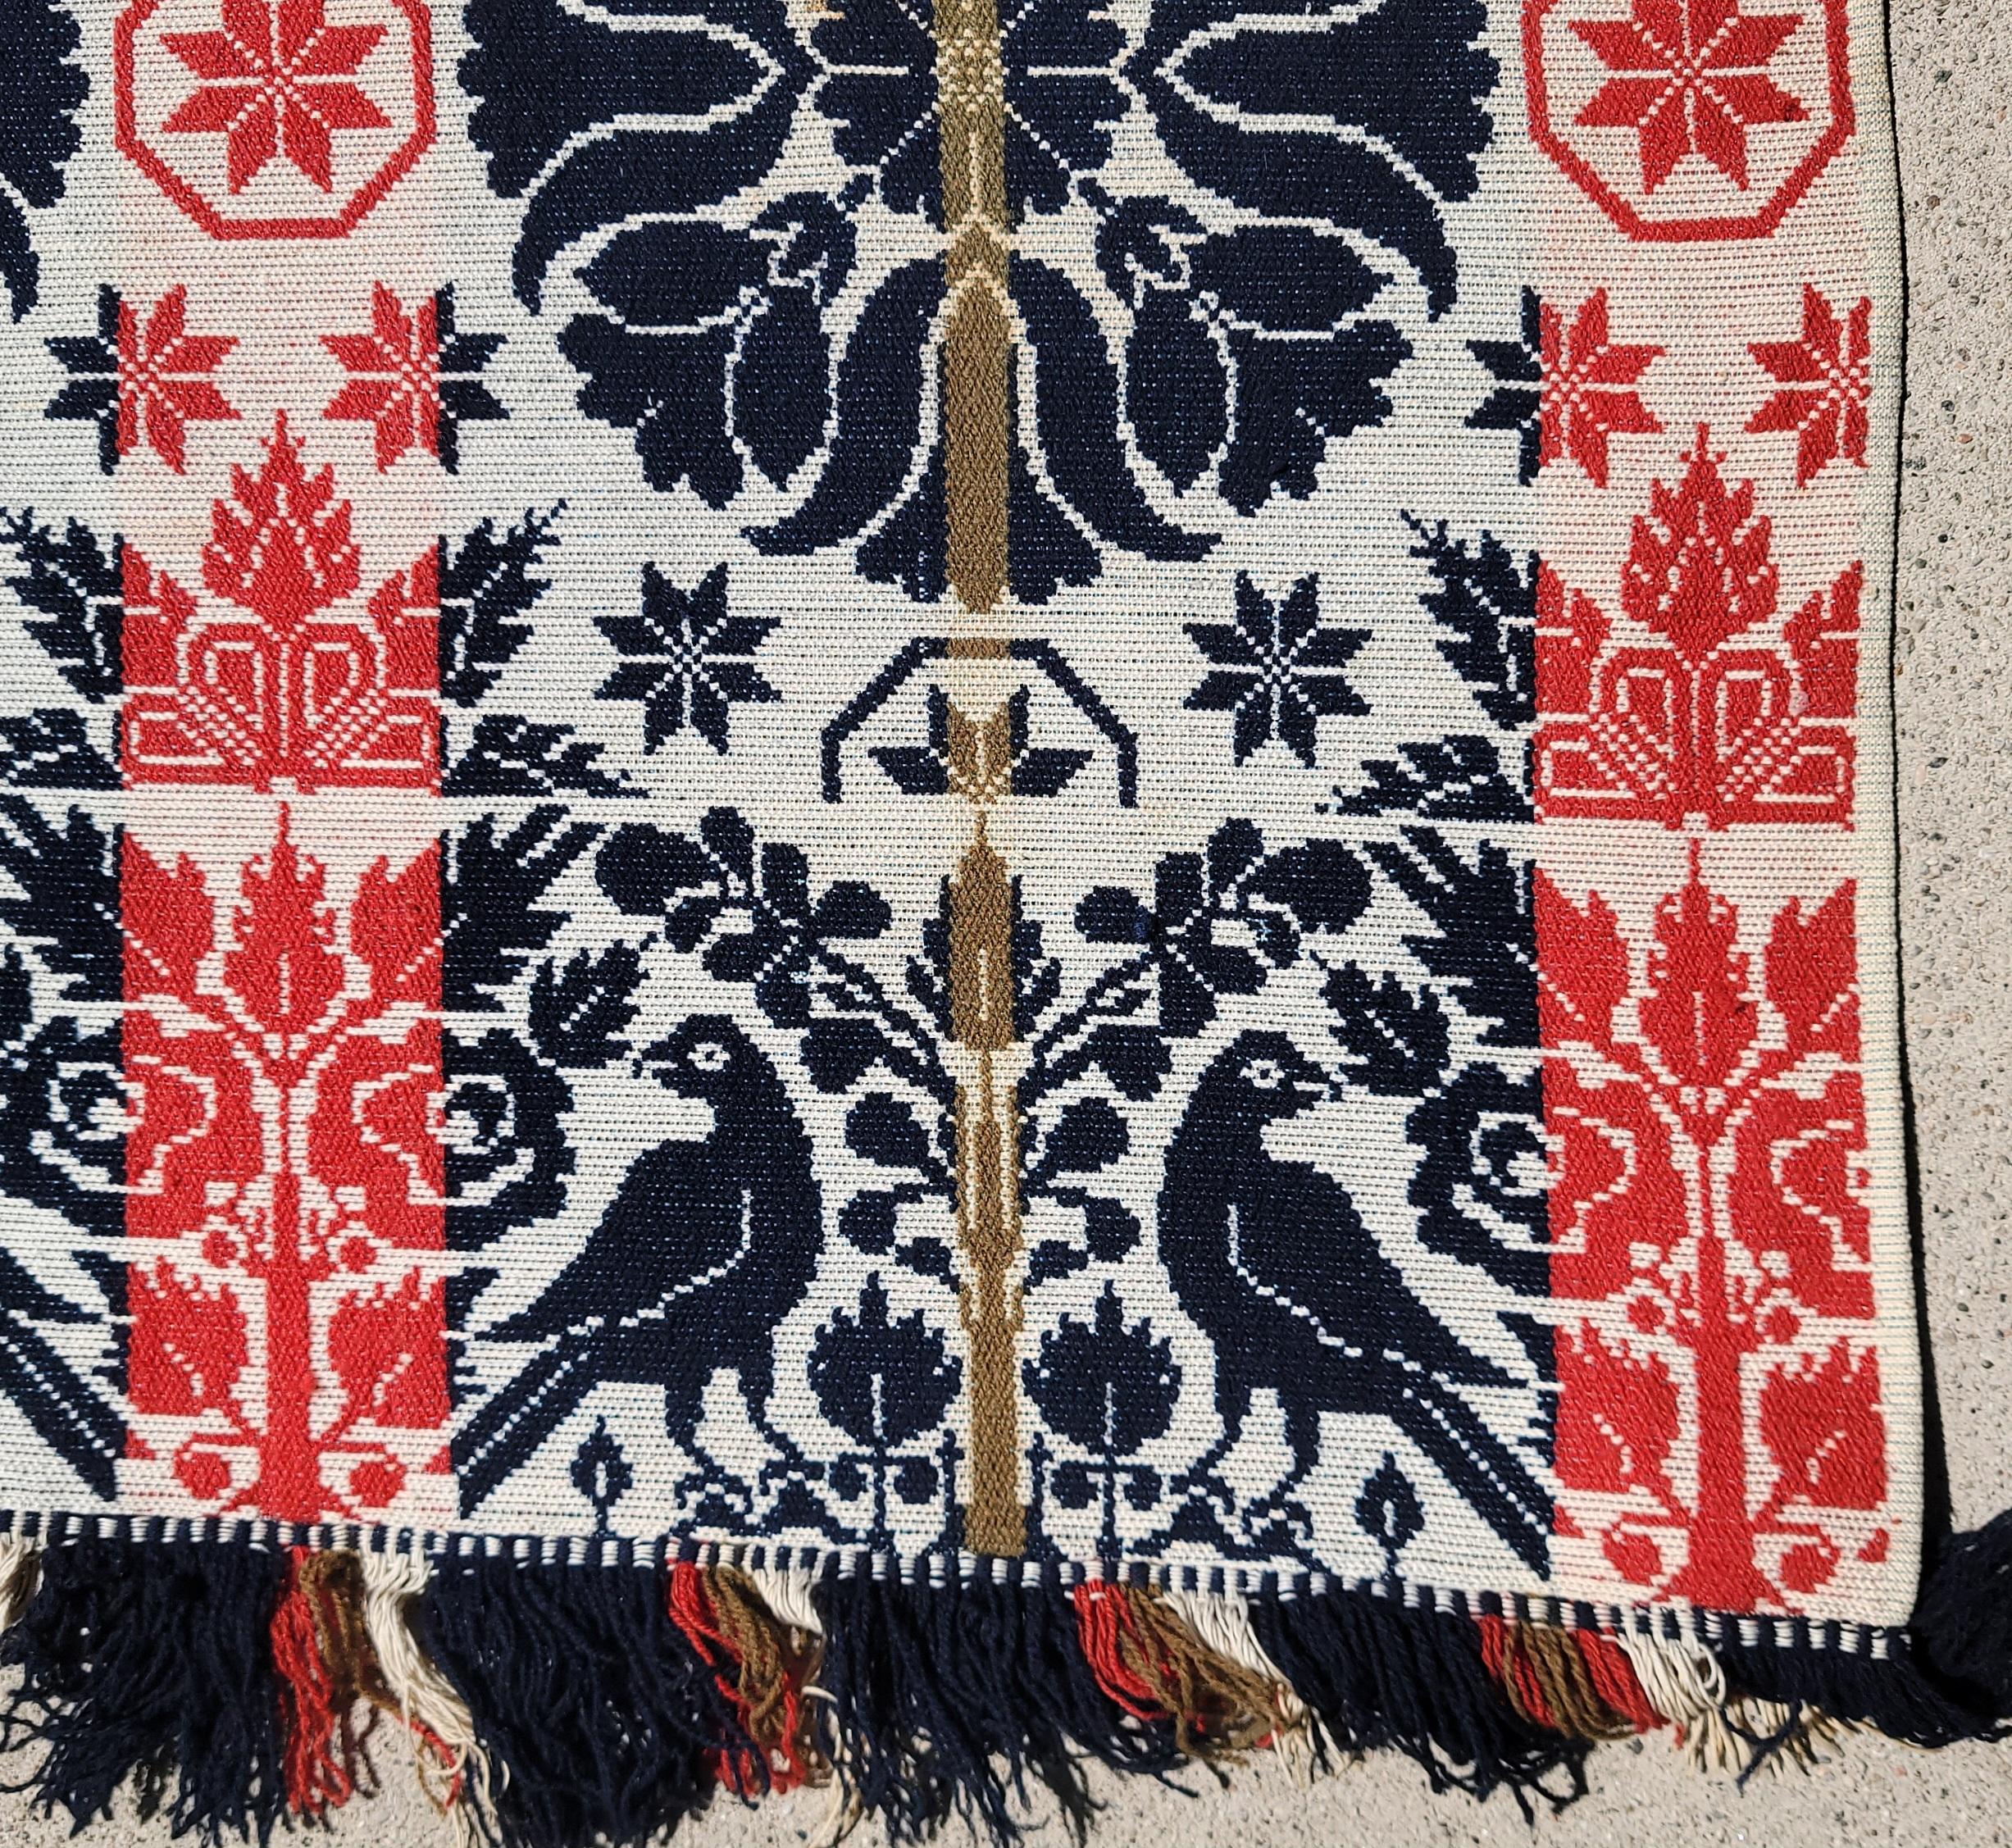 19th Century Pennsylvania Dated 1845 Woven Jacquard Coverlet For Sale